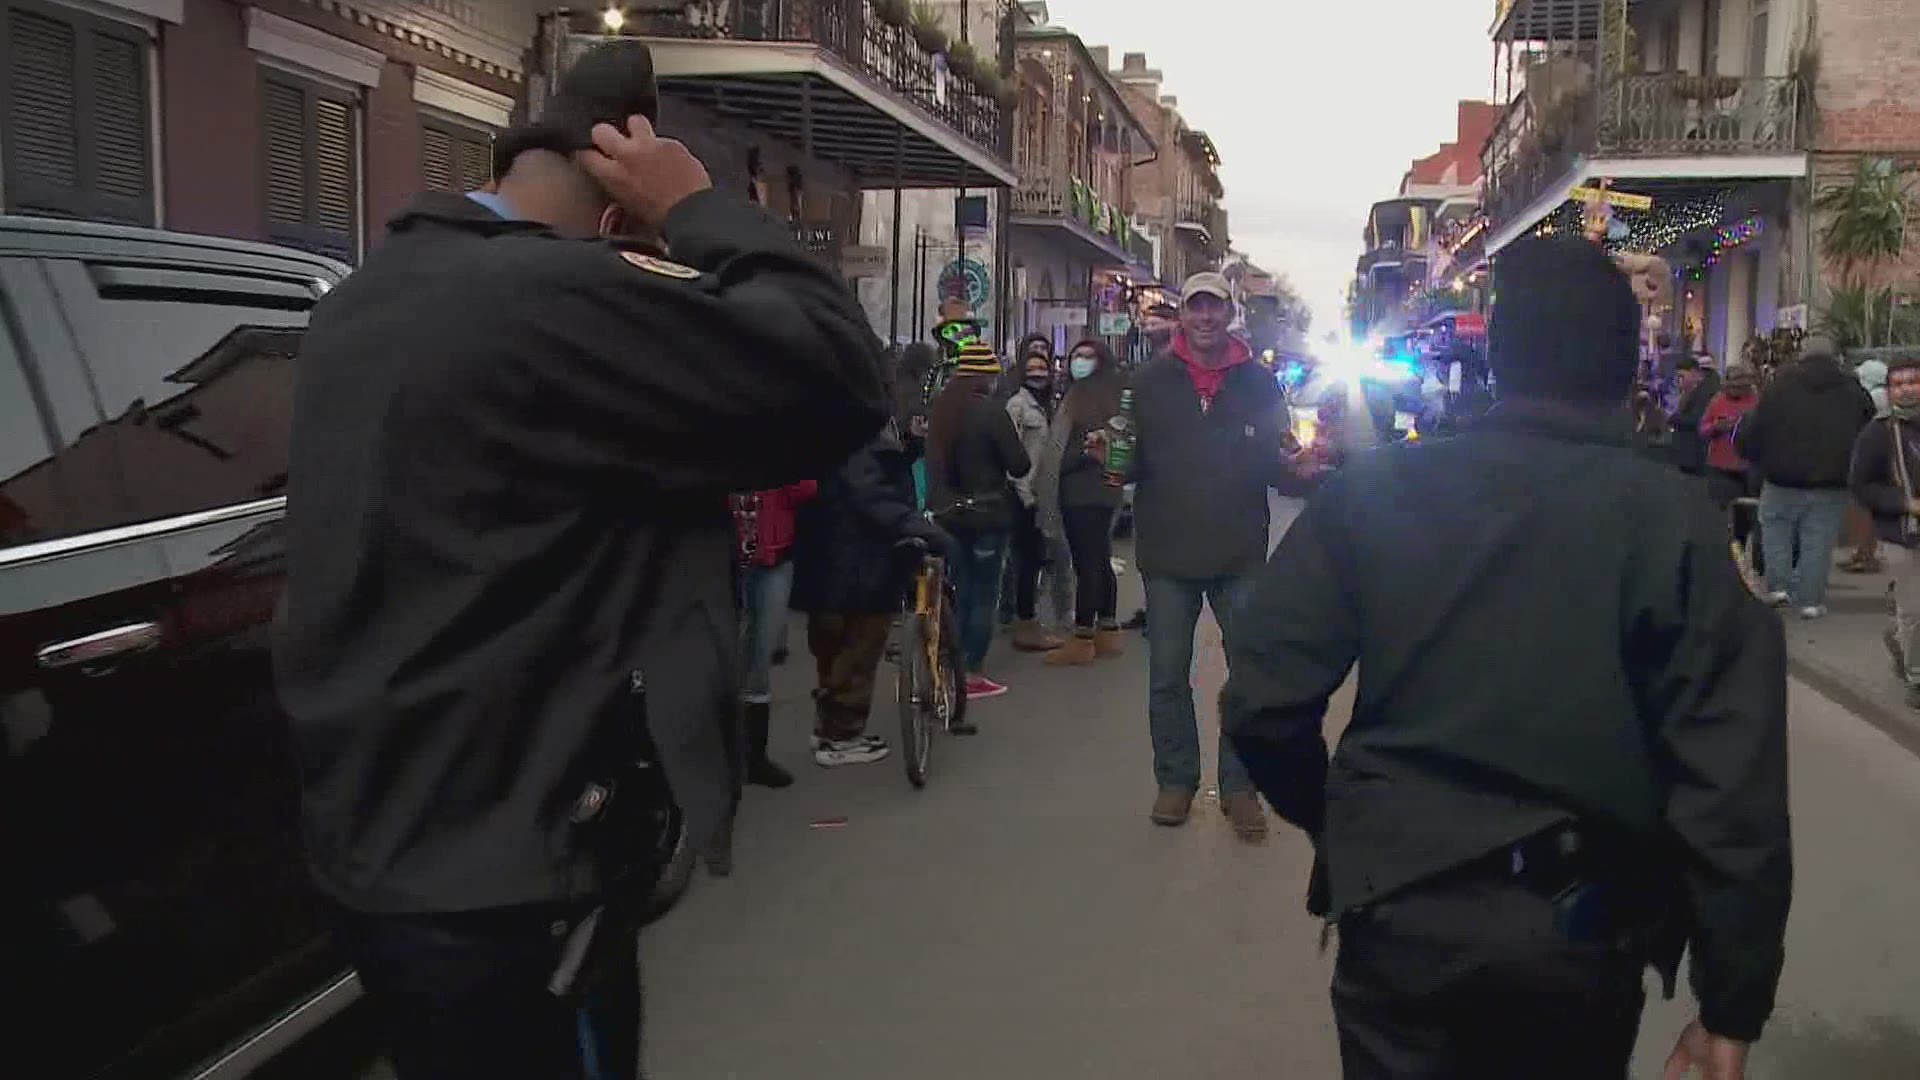 New Orleanians could not celebrate Mardi Gras the traditional way but many still made it a party.